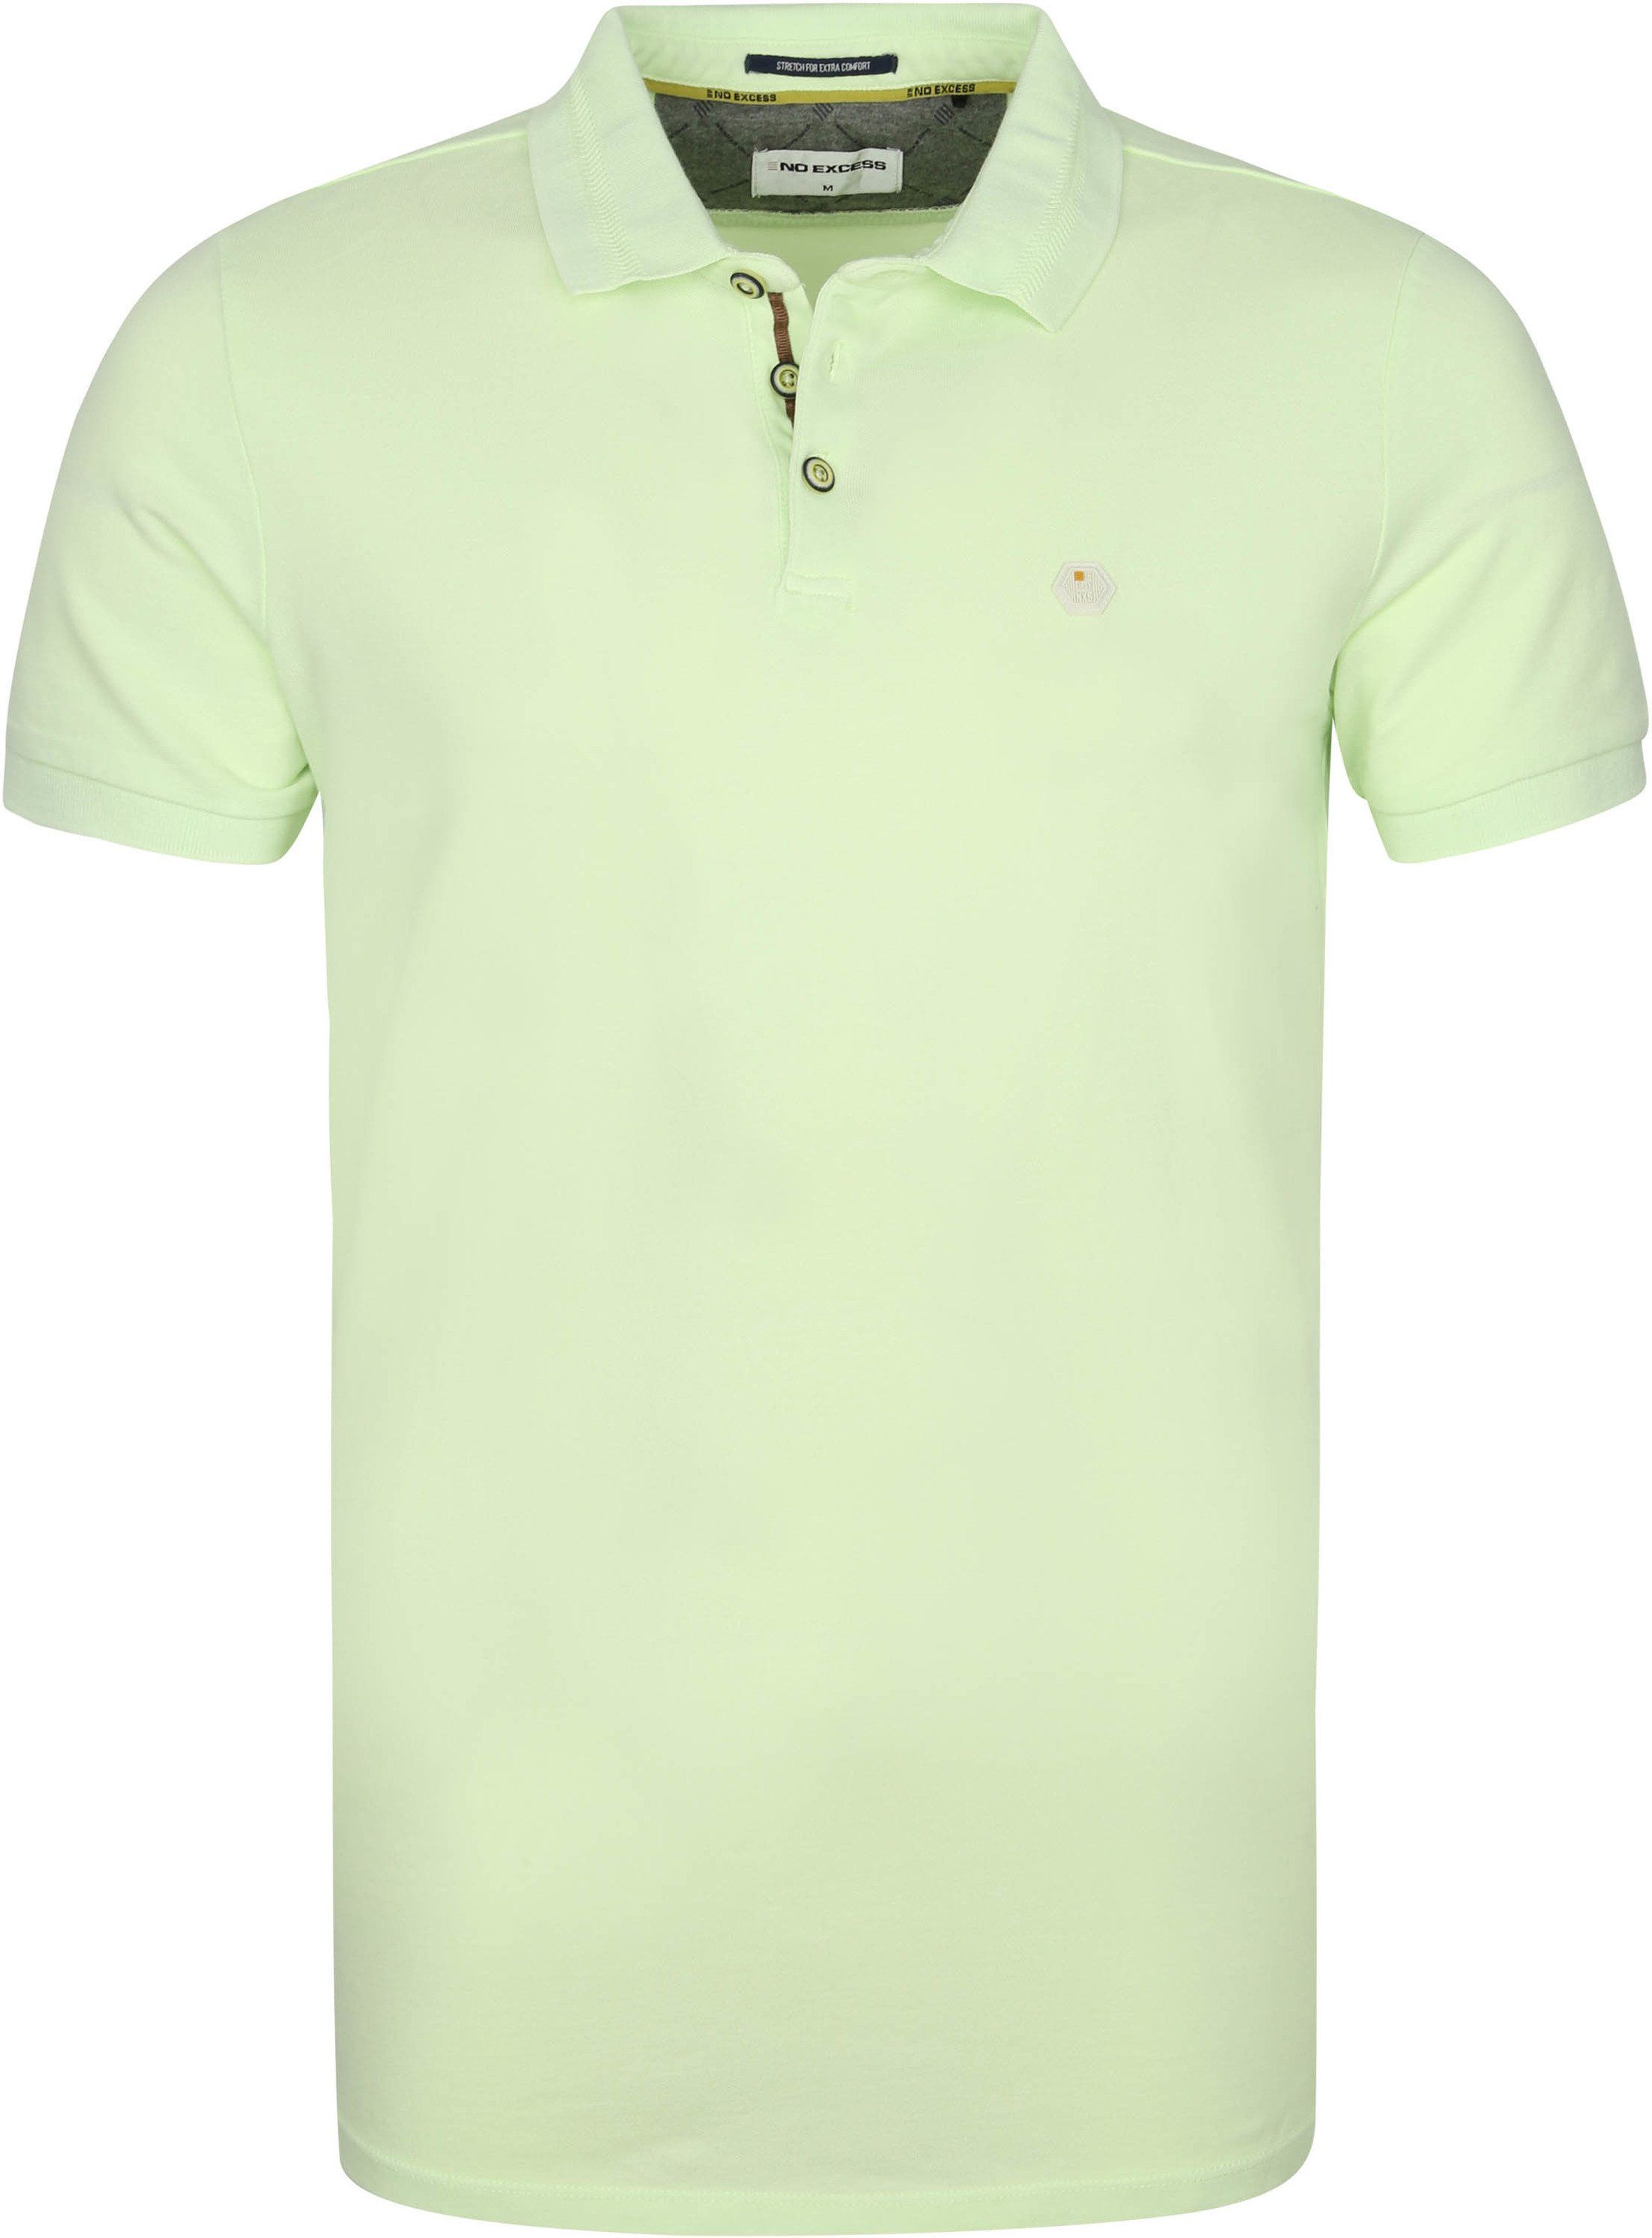 No-Excess Polo Shirt Stone Washed Lime Green size M